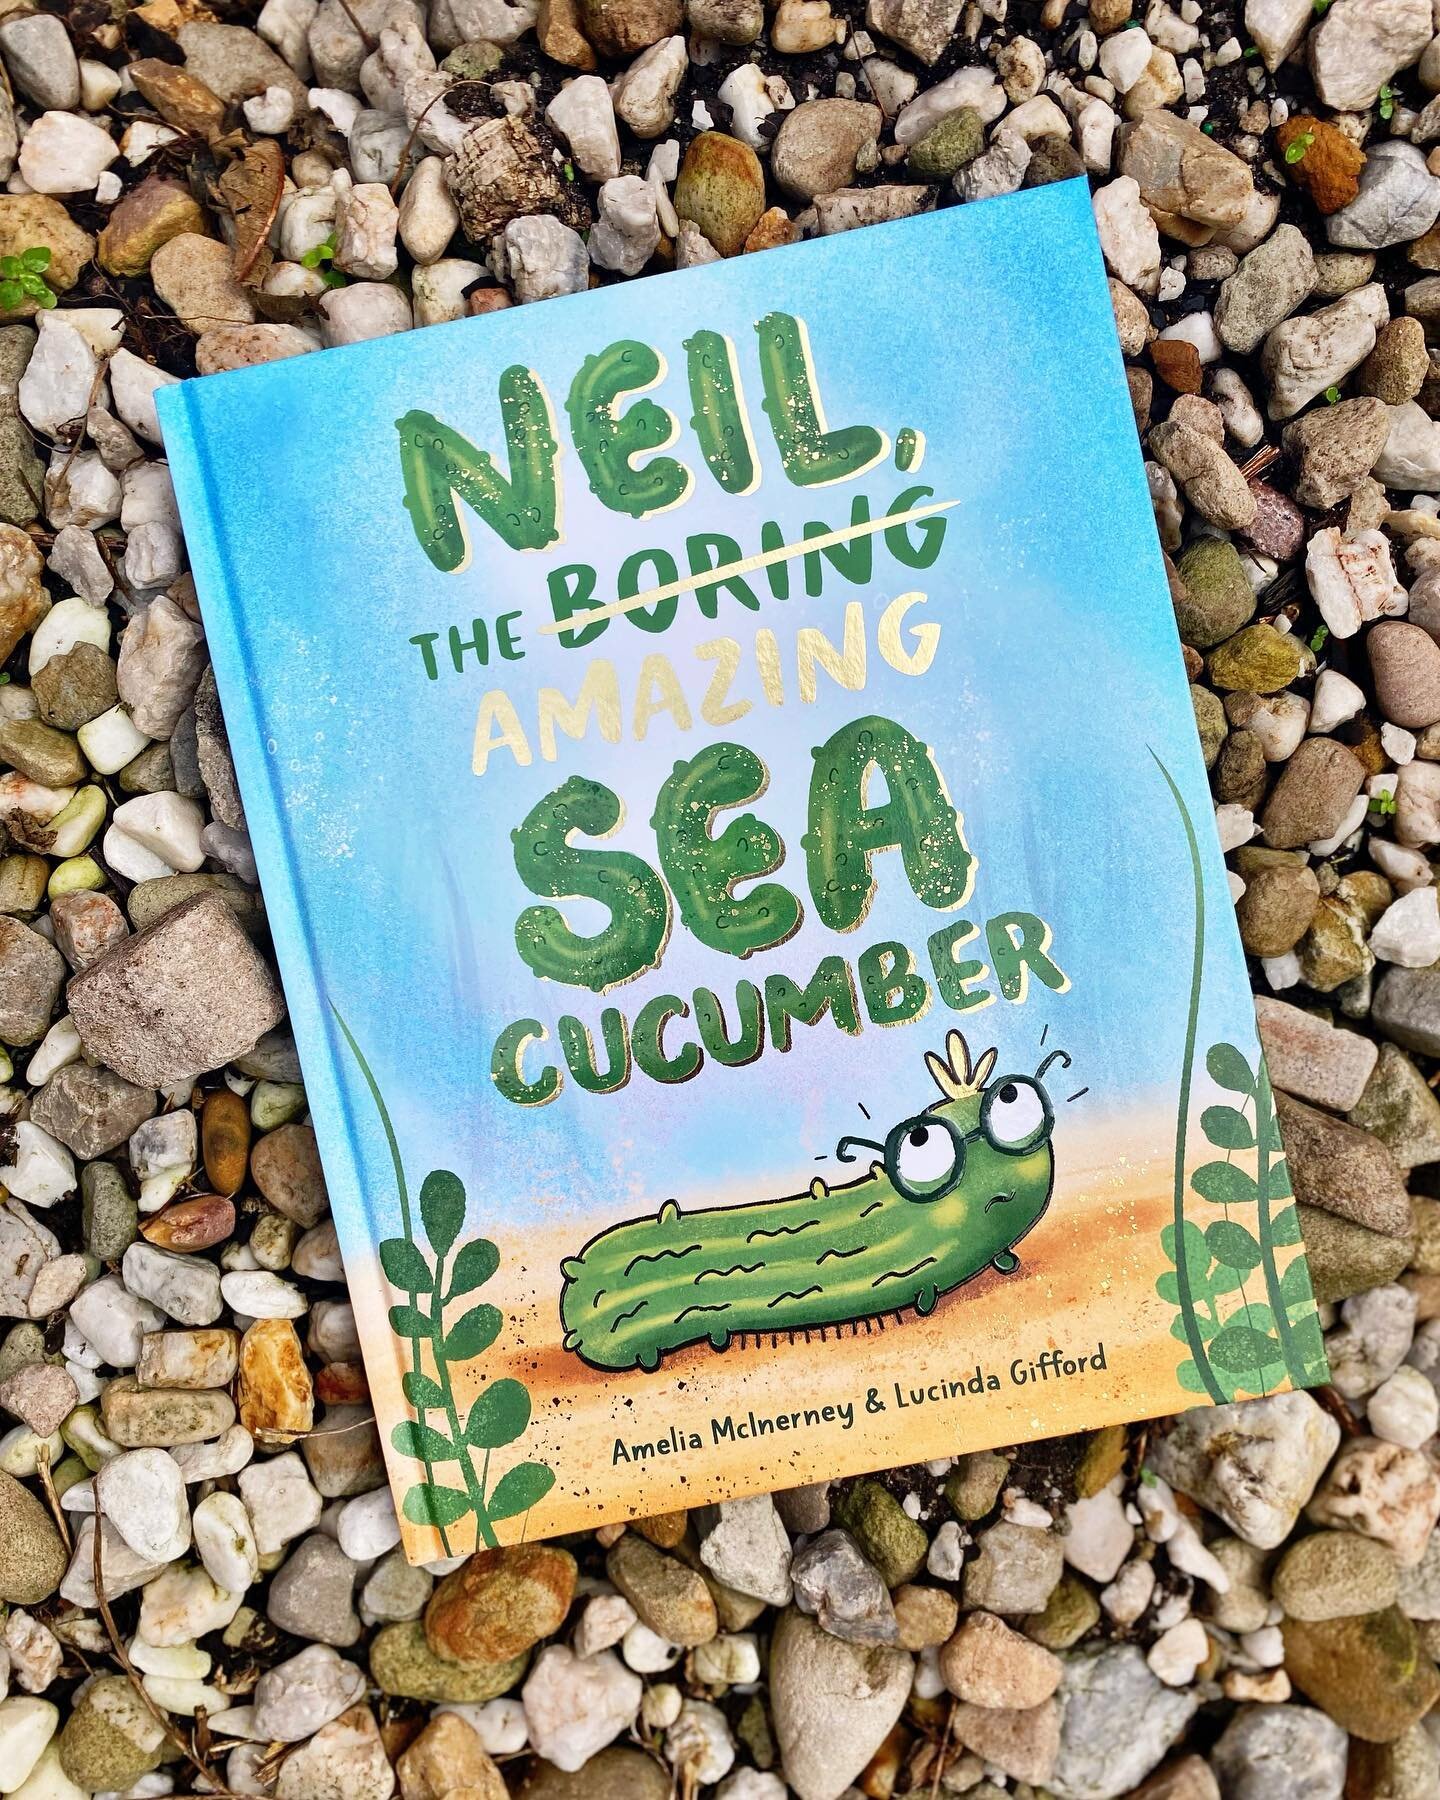 Just when you thought they'd run out of creatures to make picture books about! The hero of this very amusing book is Neil, a not-at-all-boring sea cucumber who mistakes a pickle that dropped overboard from a cruise ship for his friend Sandra. &lsquo;